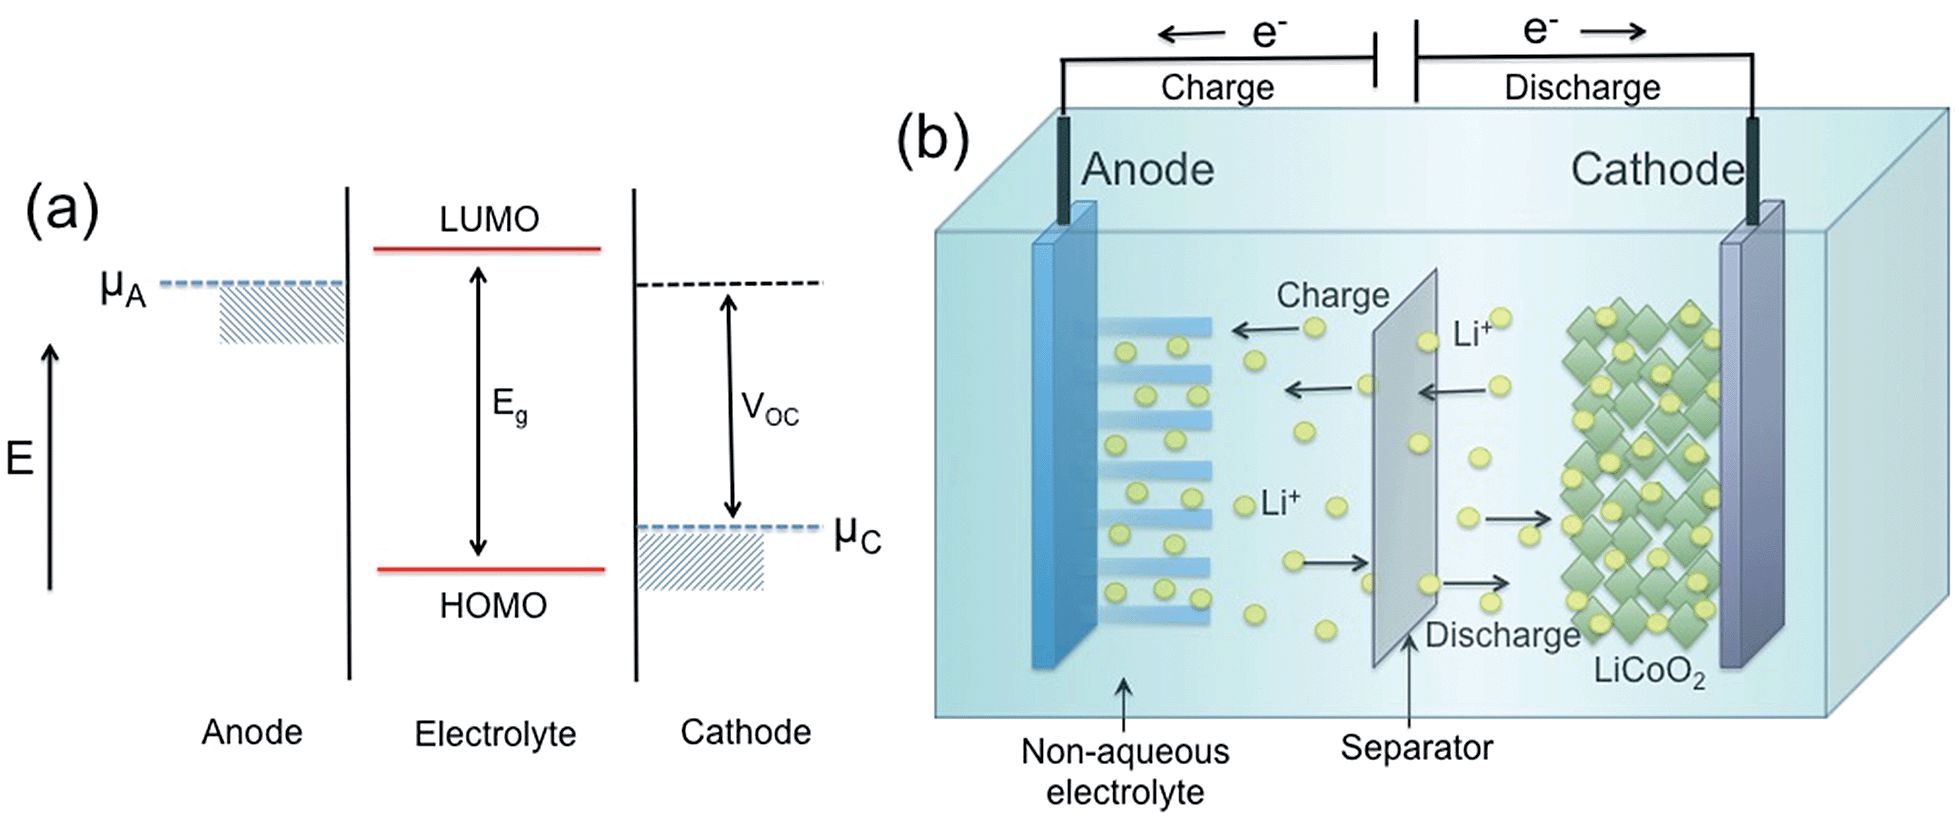 Nanostructured anode materials for lithium ion batteries - Journal of  Materials Chemistry A (RSC Publishing) DOI:10.1039/C4TA04980B